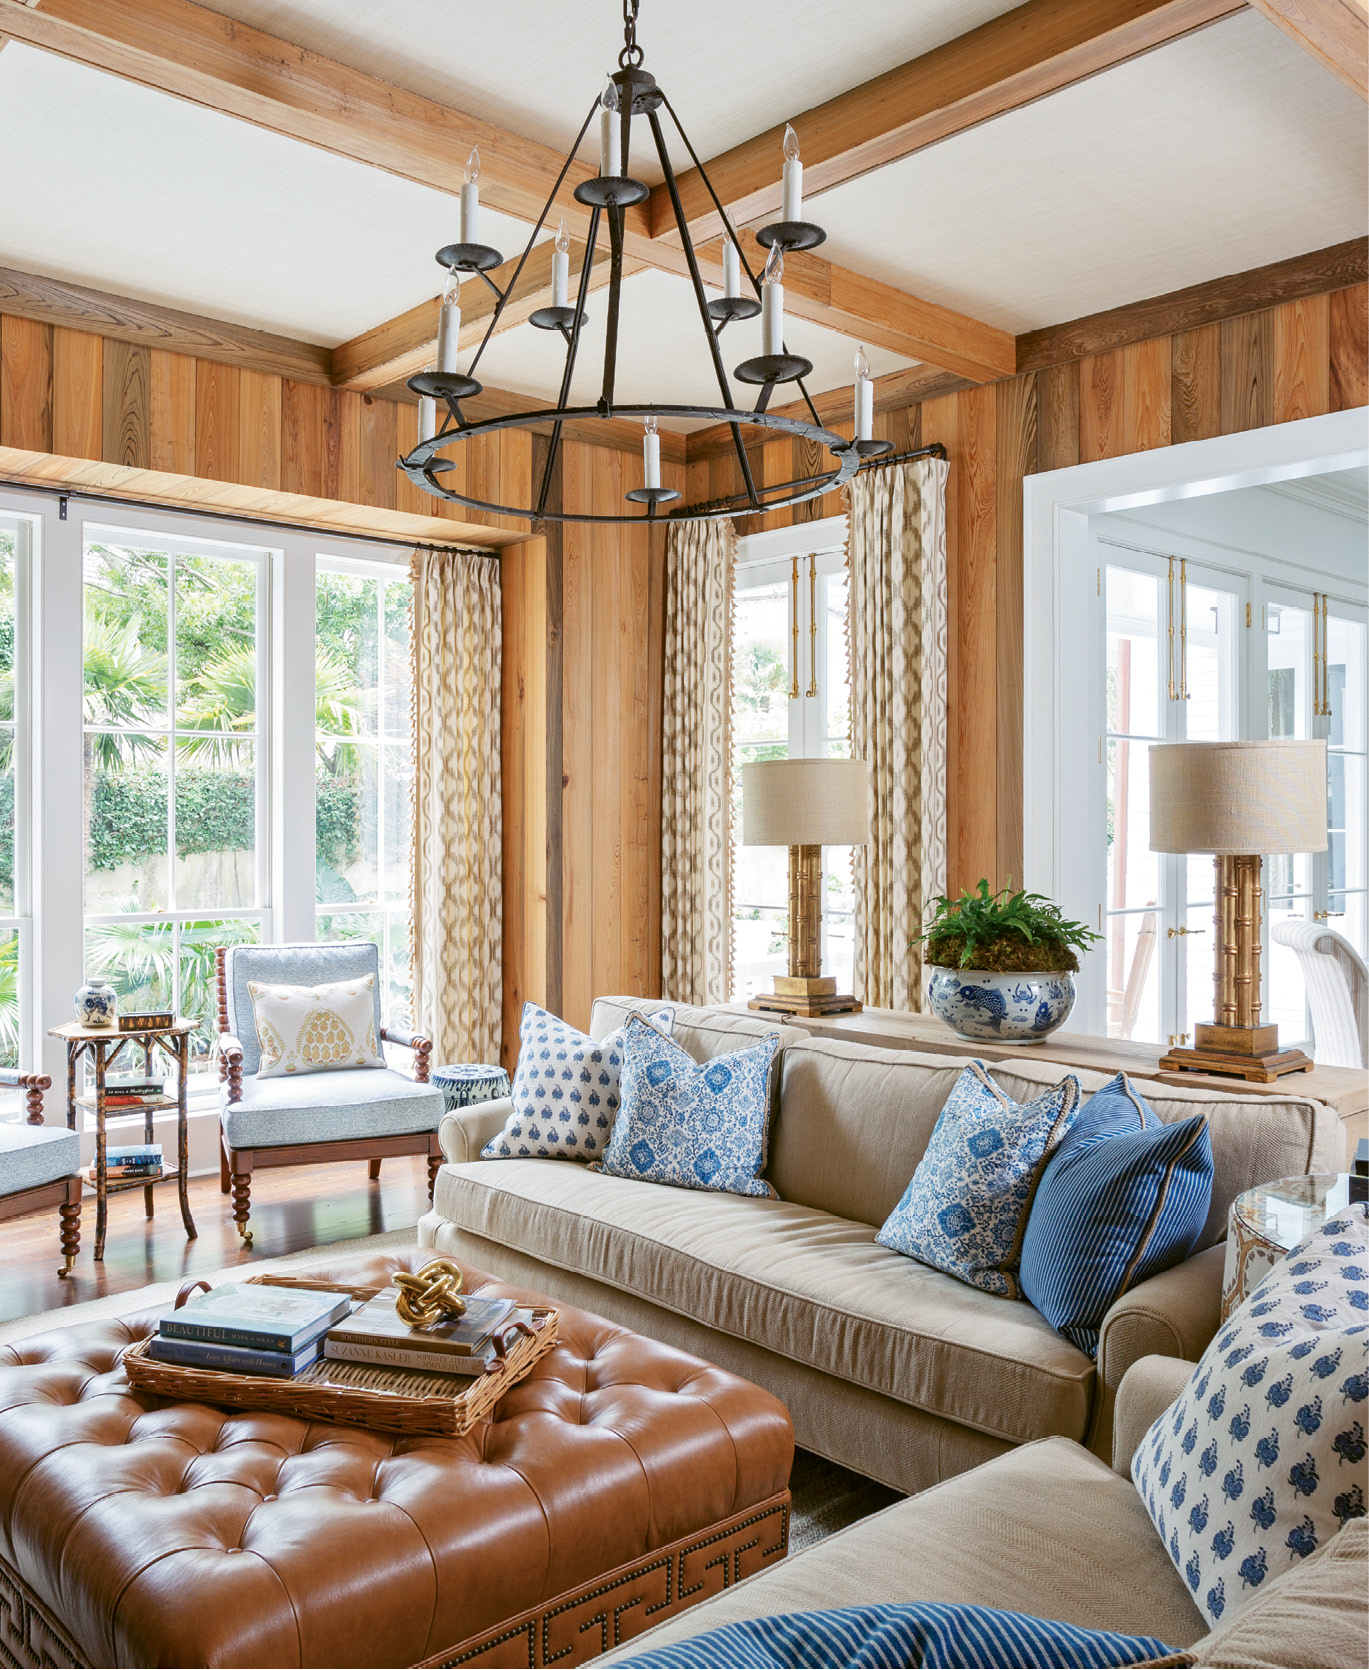 While updating a century-old residence South of Broad, architect Beau Clowney sought to reinstate some of the home’s likely architectural past, such as the cypress paneling in this handsome den.